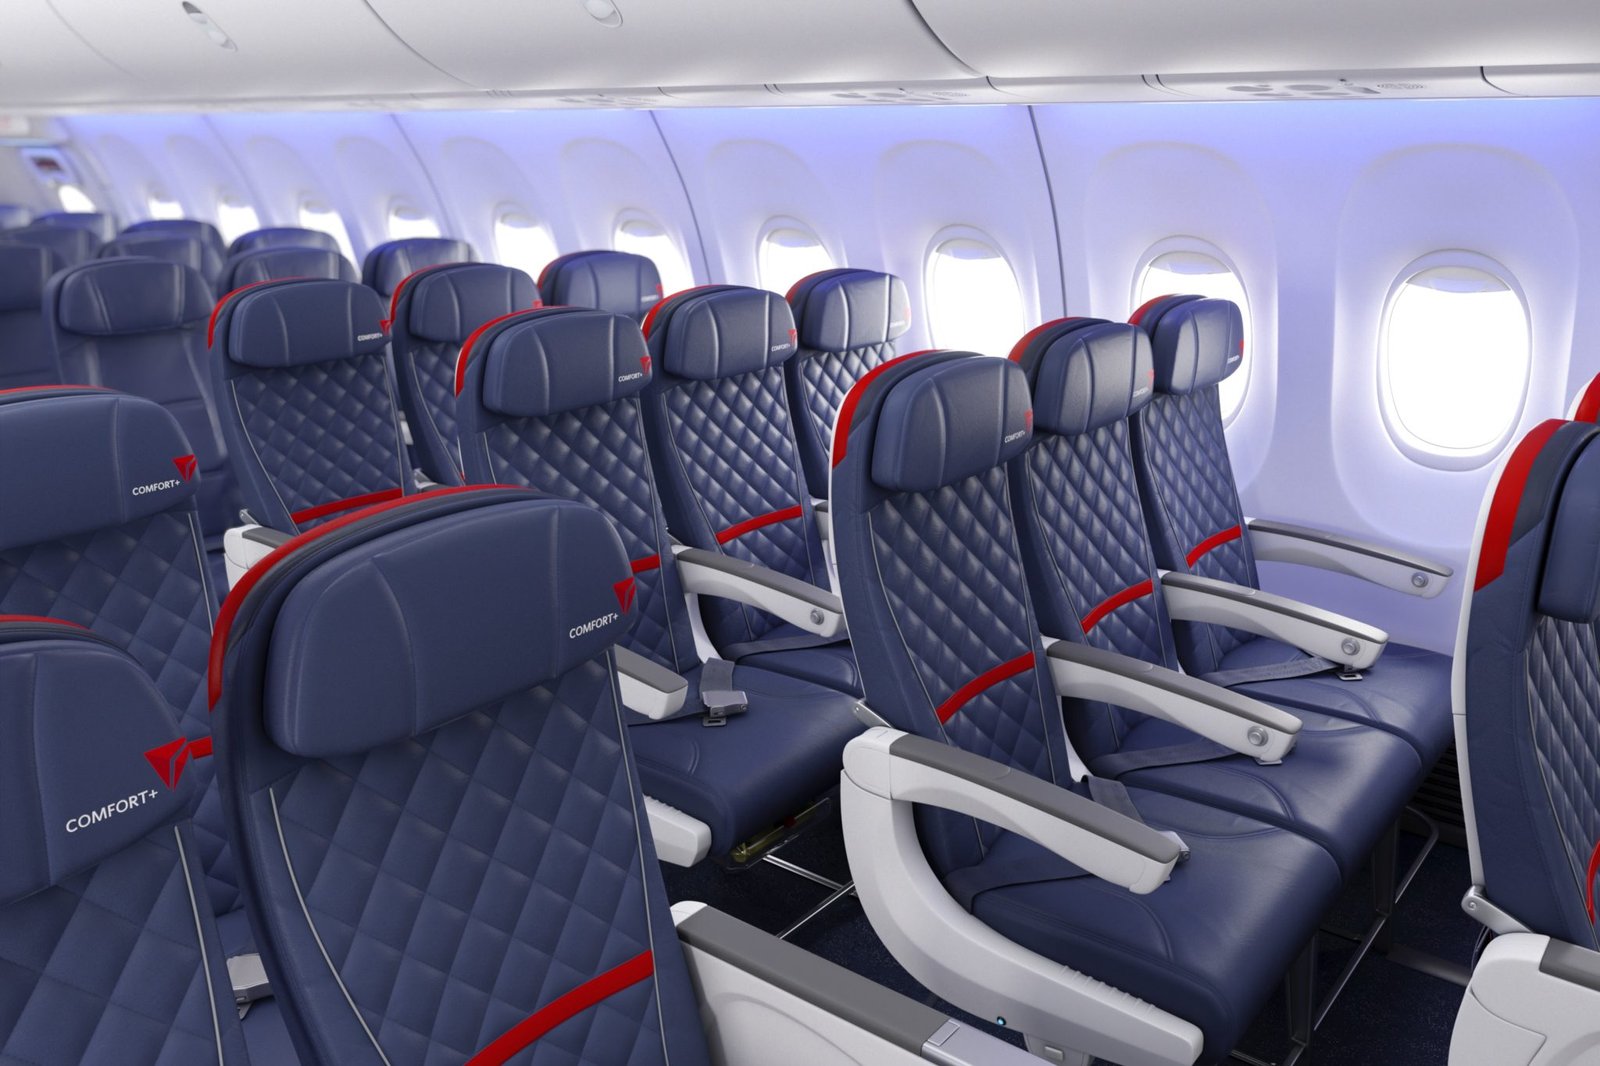 Delta Airlines Seat Selection Policy and Seat Assignment